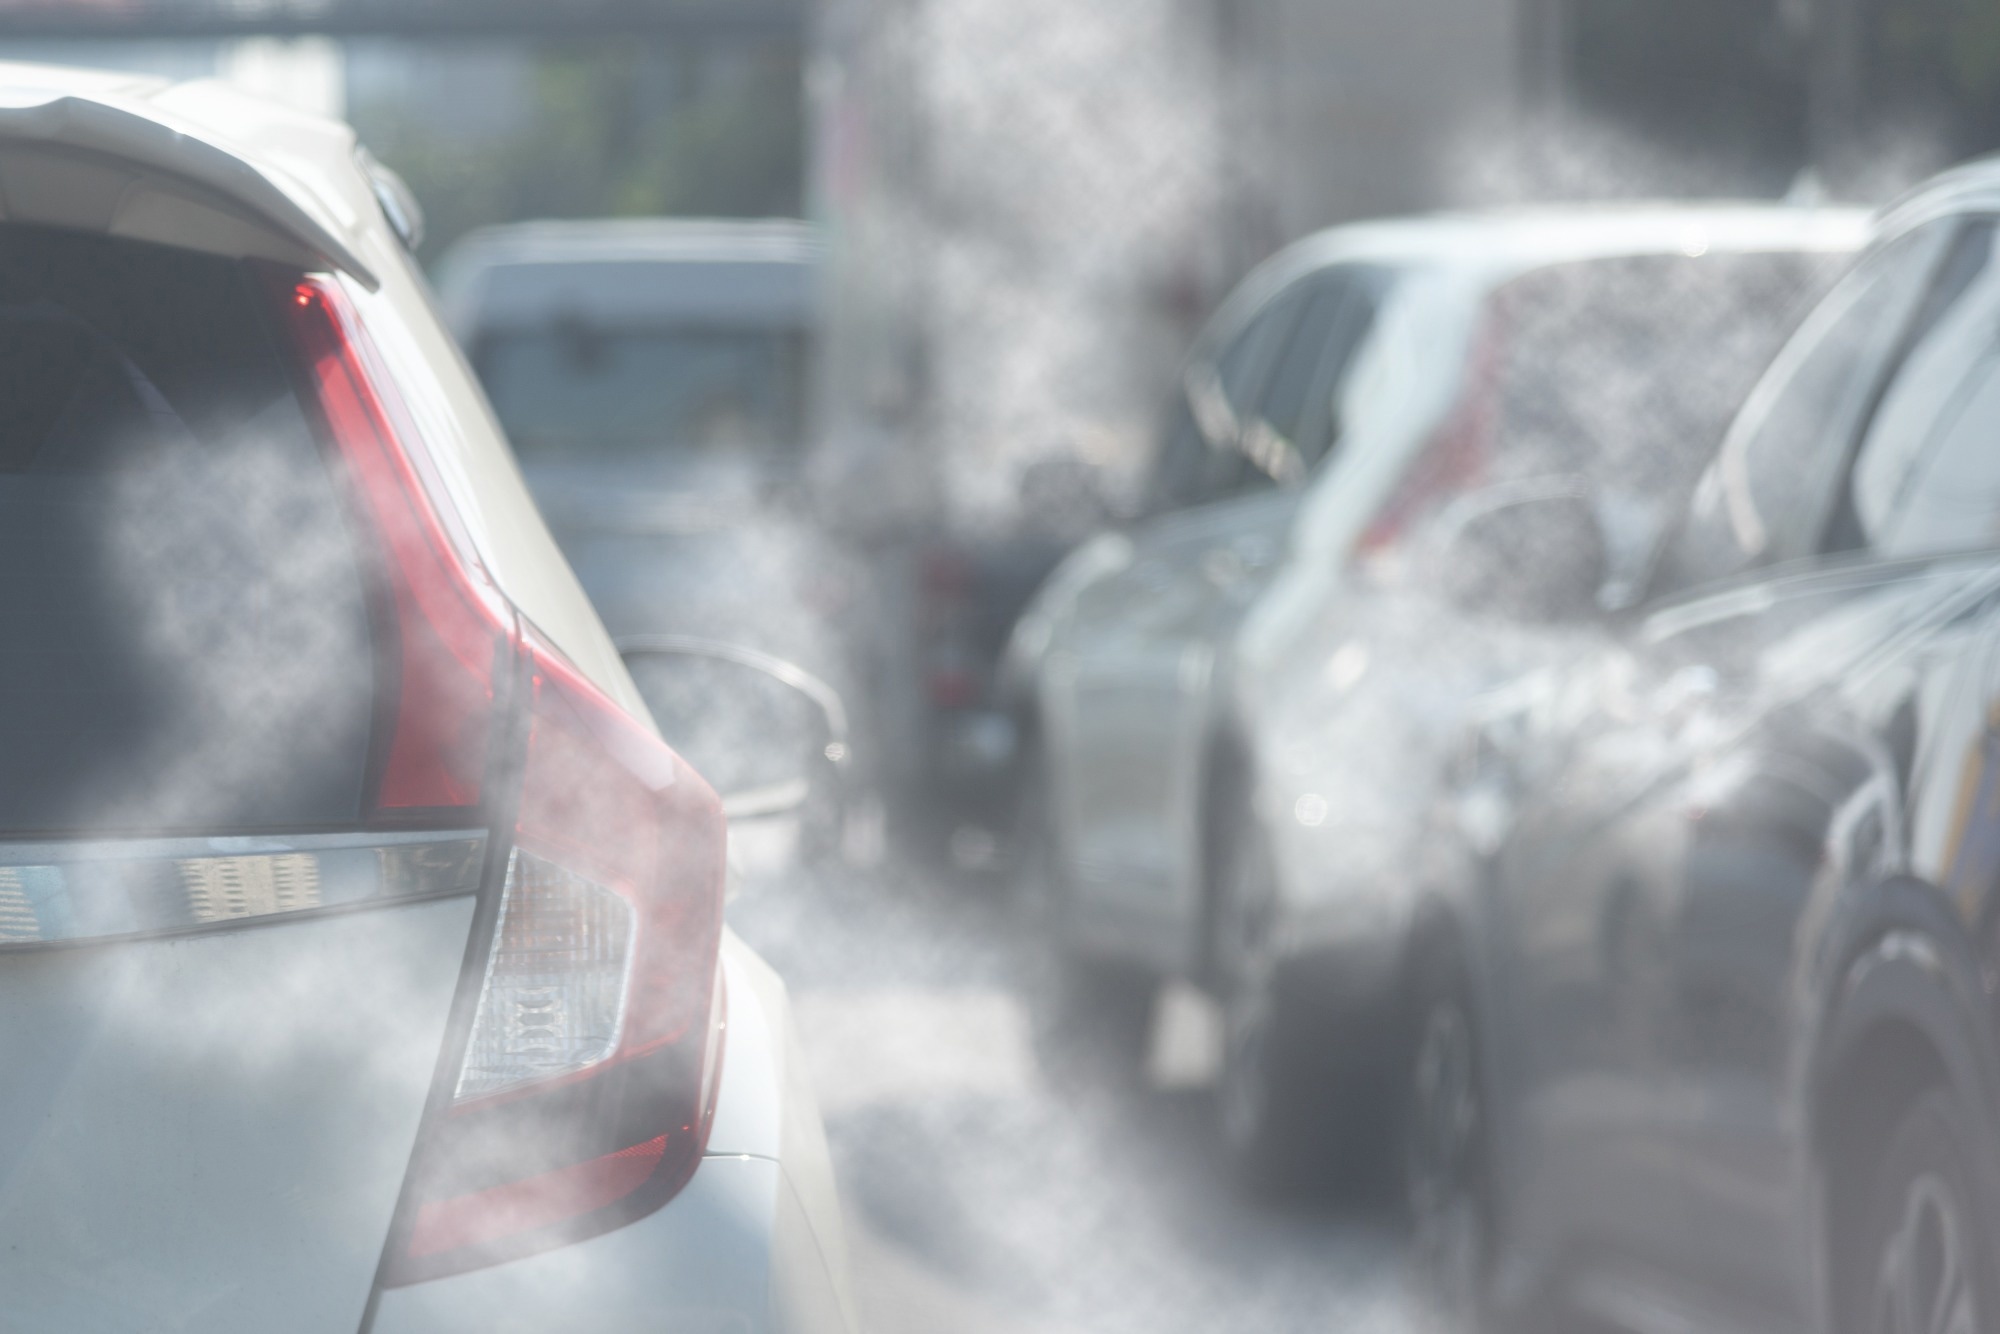 Study: Effect of air pollution exposure on risk of acute coronary syndromes in Poland: a nationwide population-based study (EP-PARTICLES study). Image Credit: khunkornStudio/Shutterstock.com